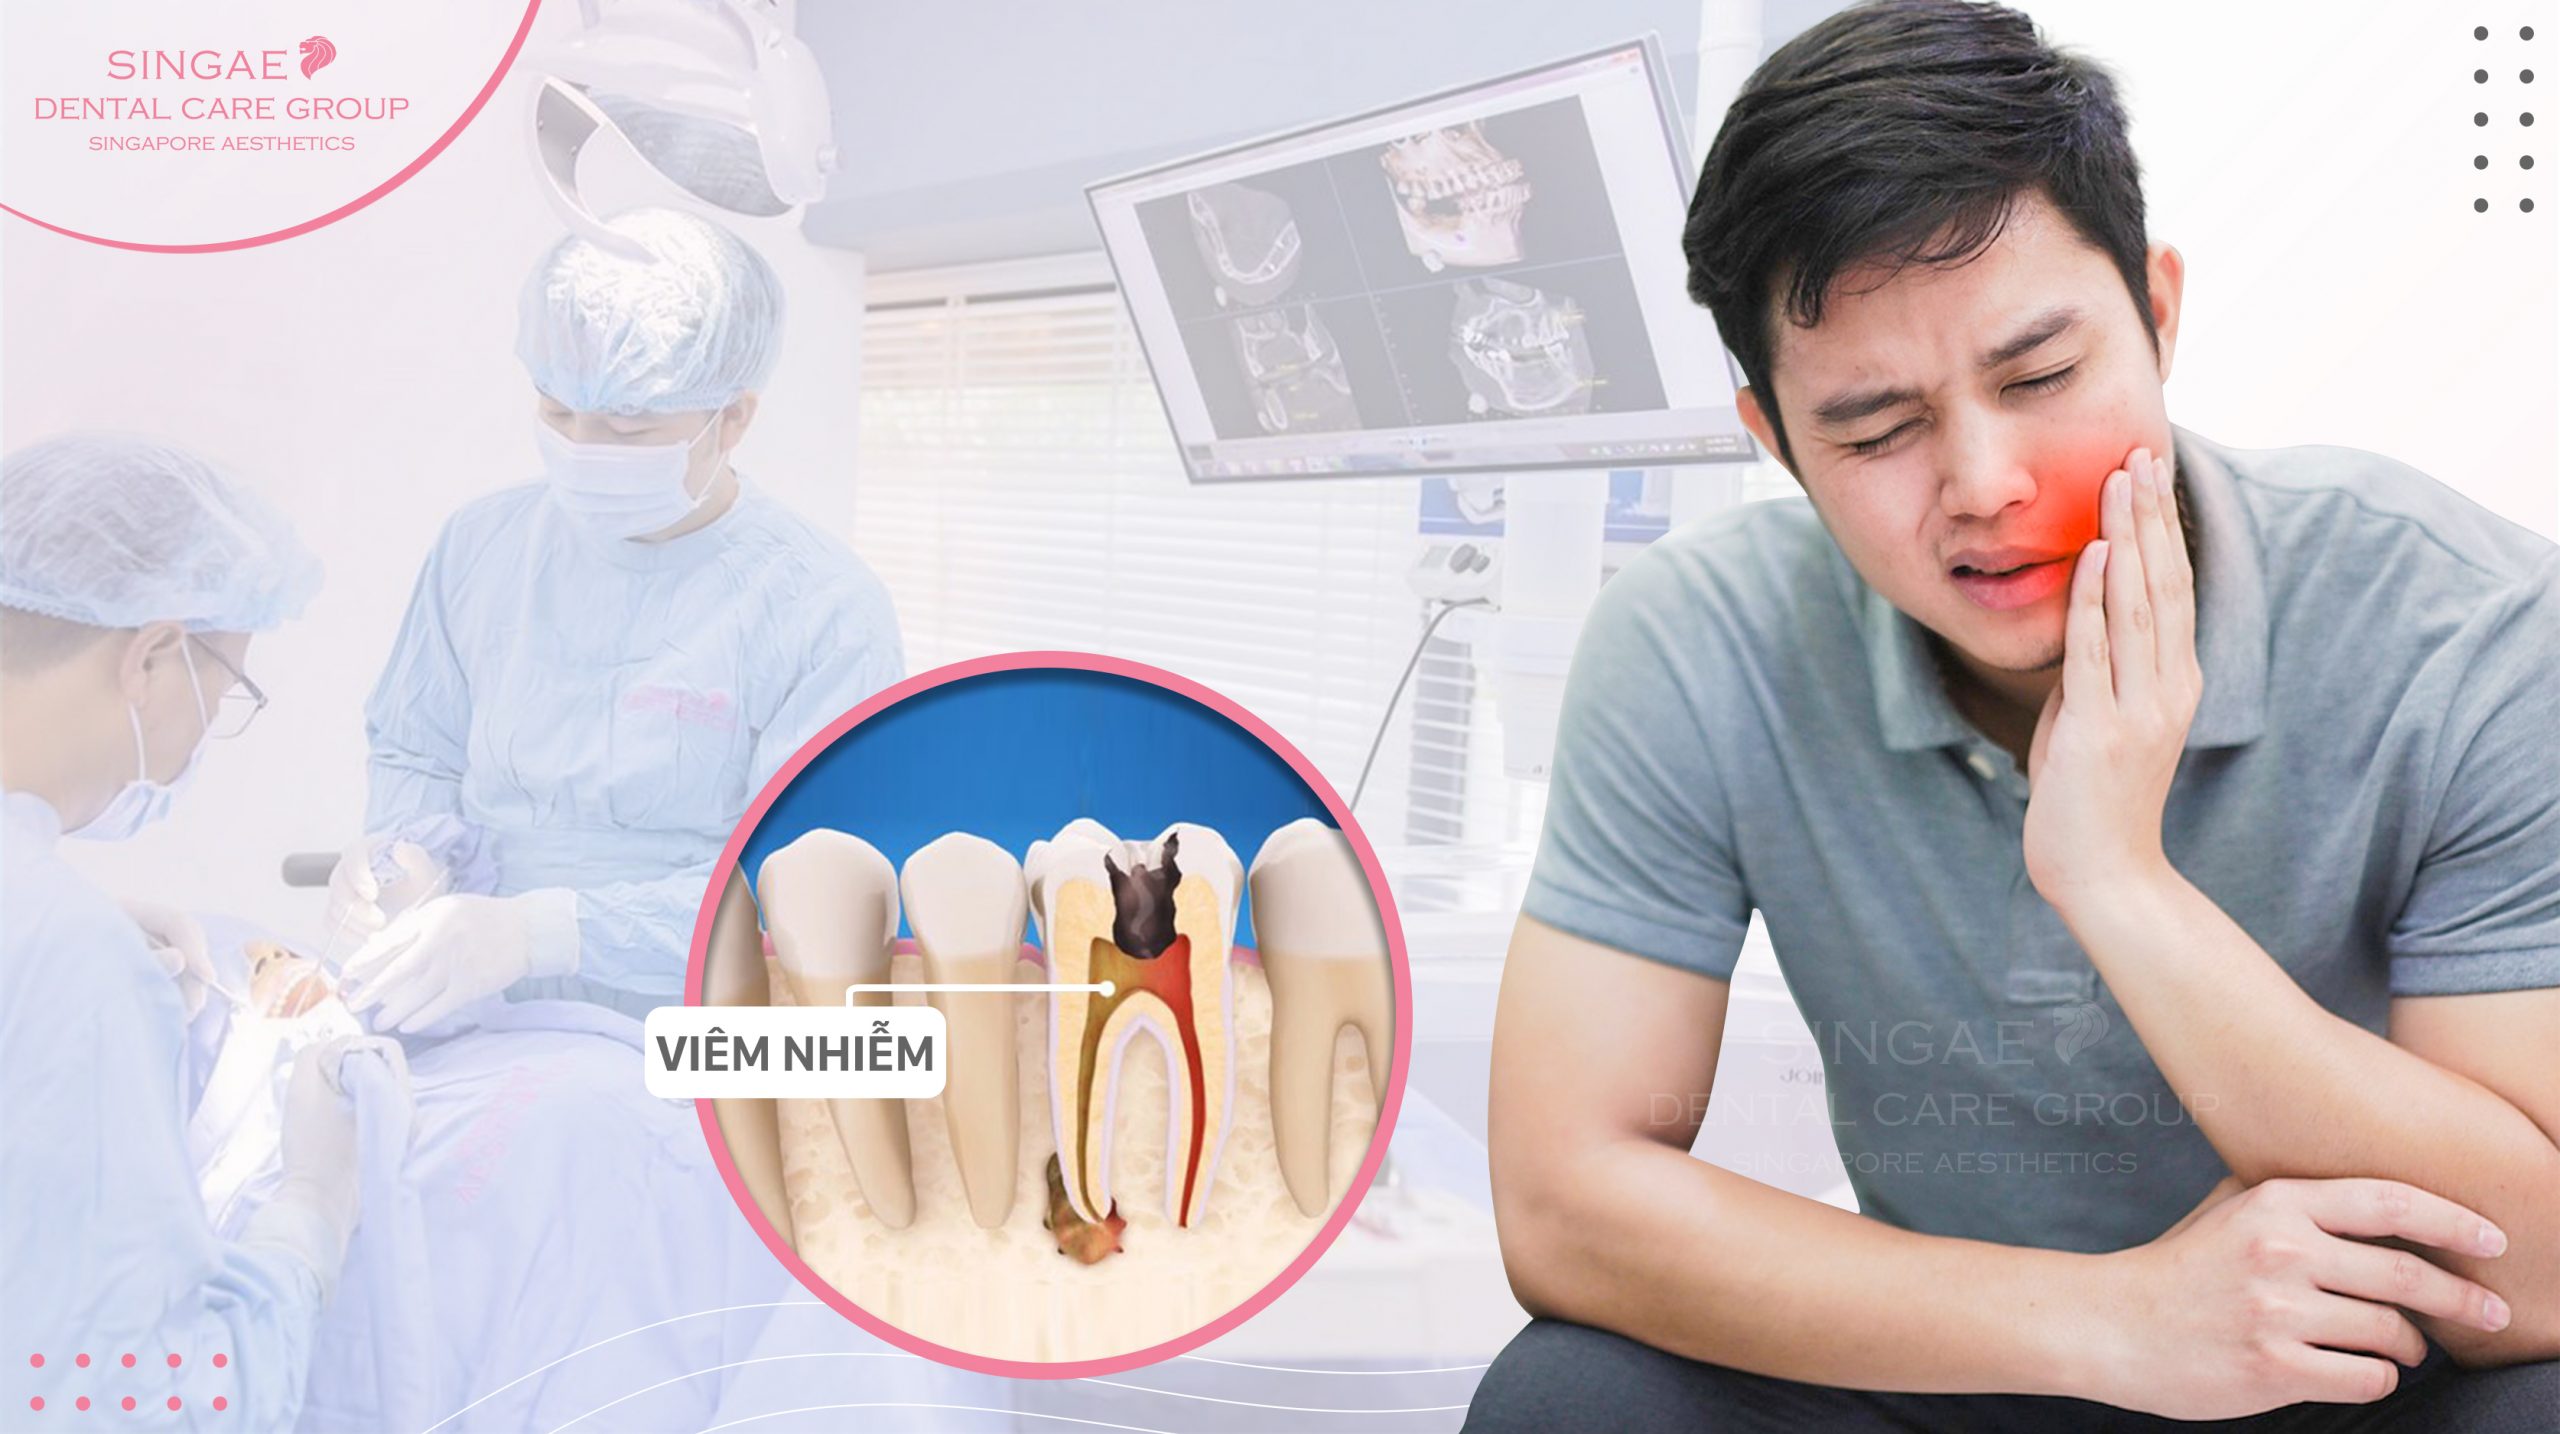 IS ROOT CANAL TREATMENT PAINFUL? TOOTHACHE AFTER ROOT CANAL TREATMENT SHOULD DO?